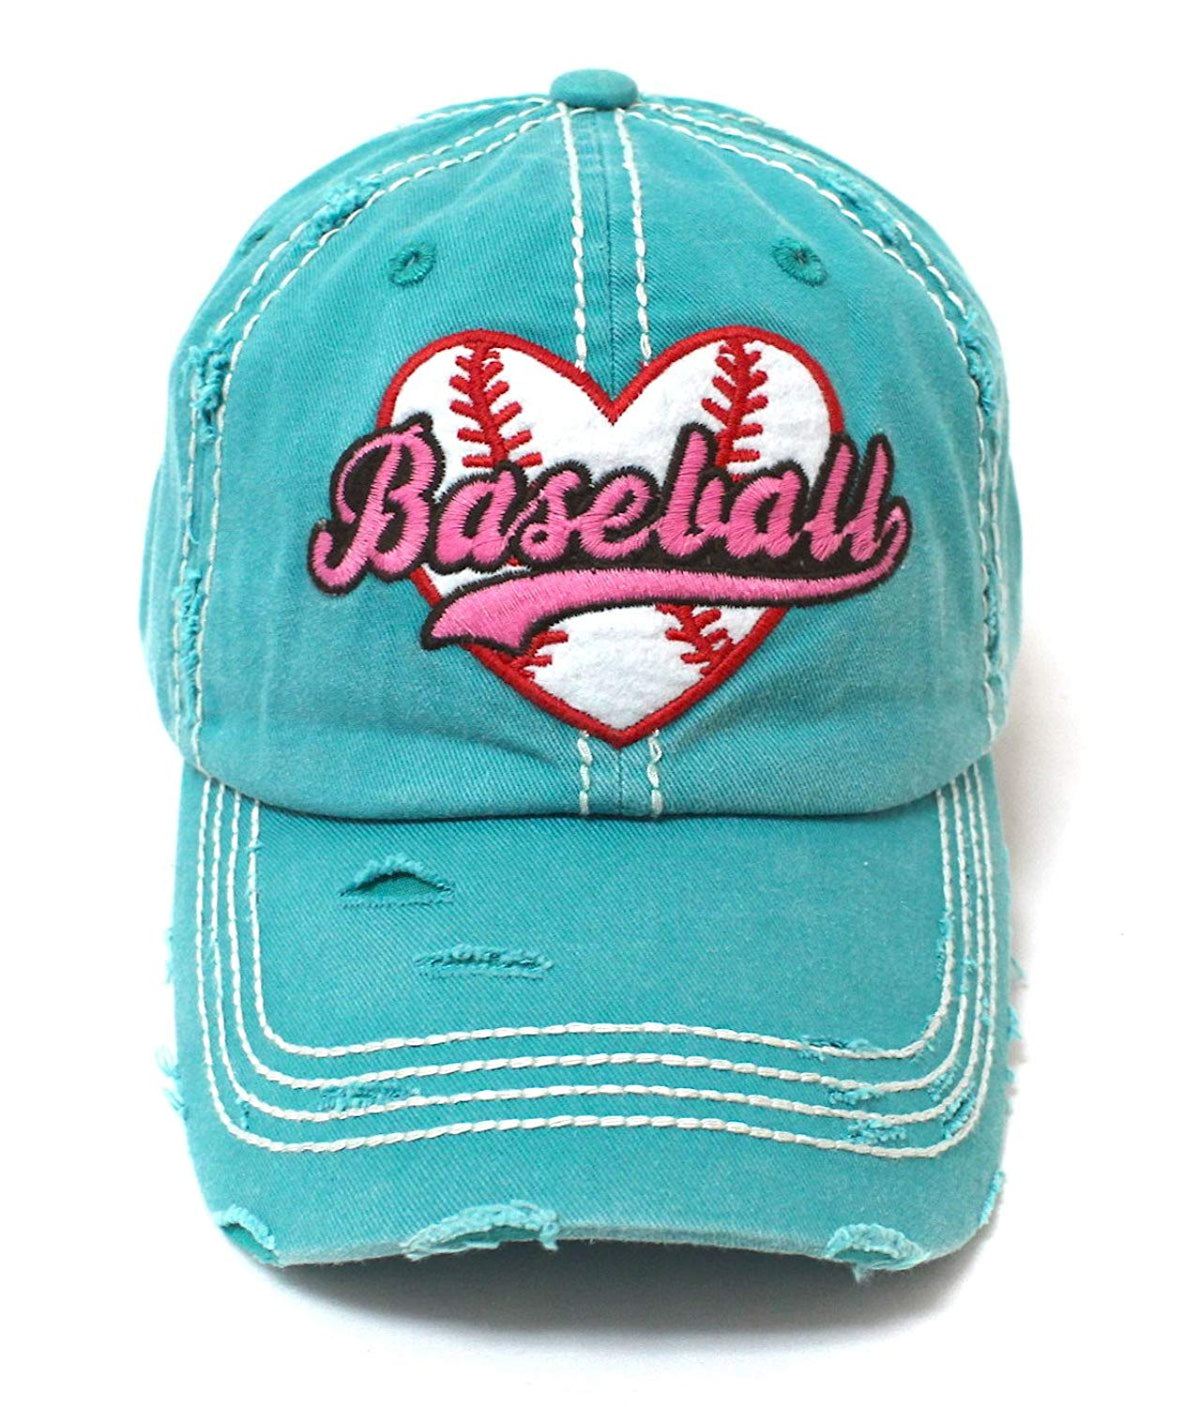 CAPS 'N VINTAGE New! Turquoise Baseball Heart Patch Women's Hat - Caps 'N Vintage 